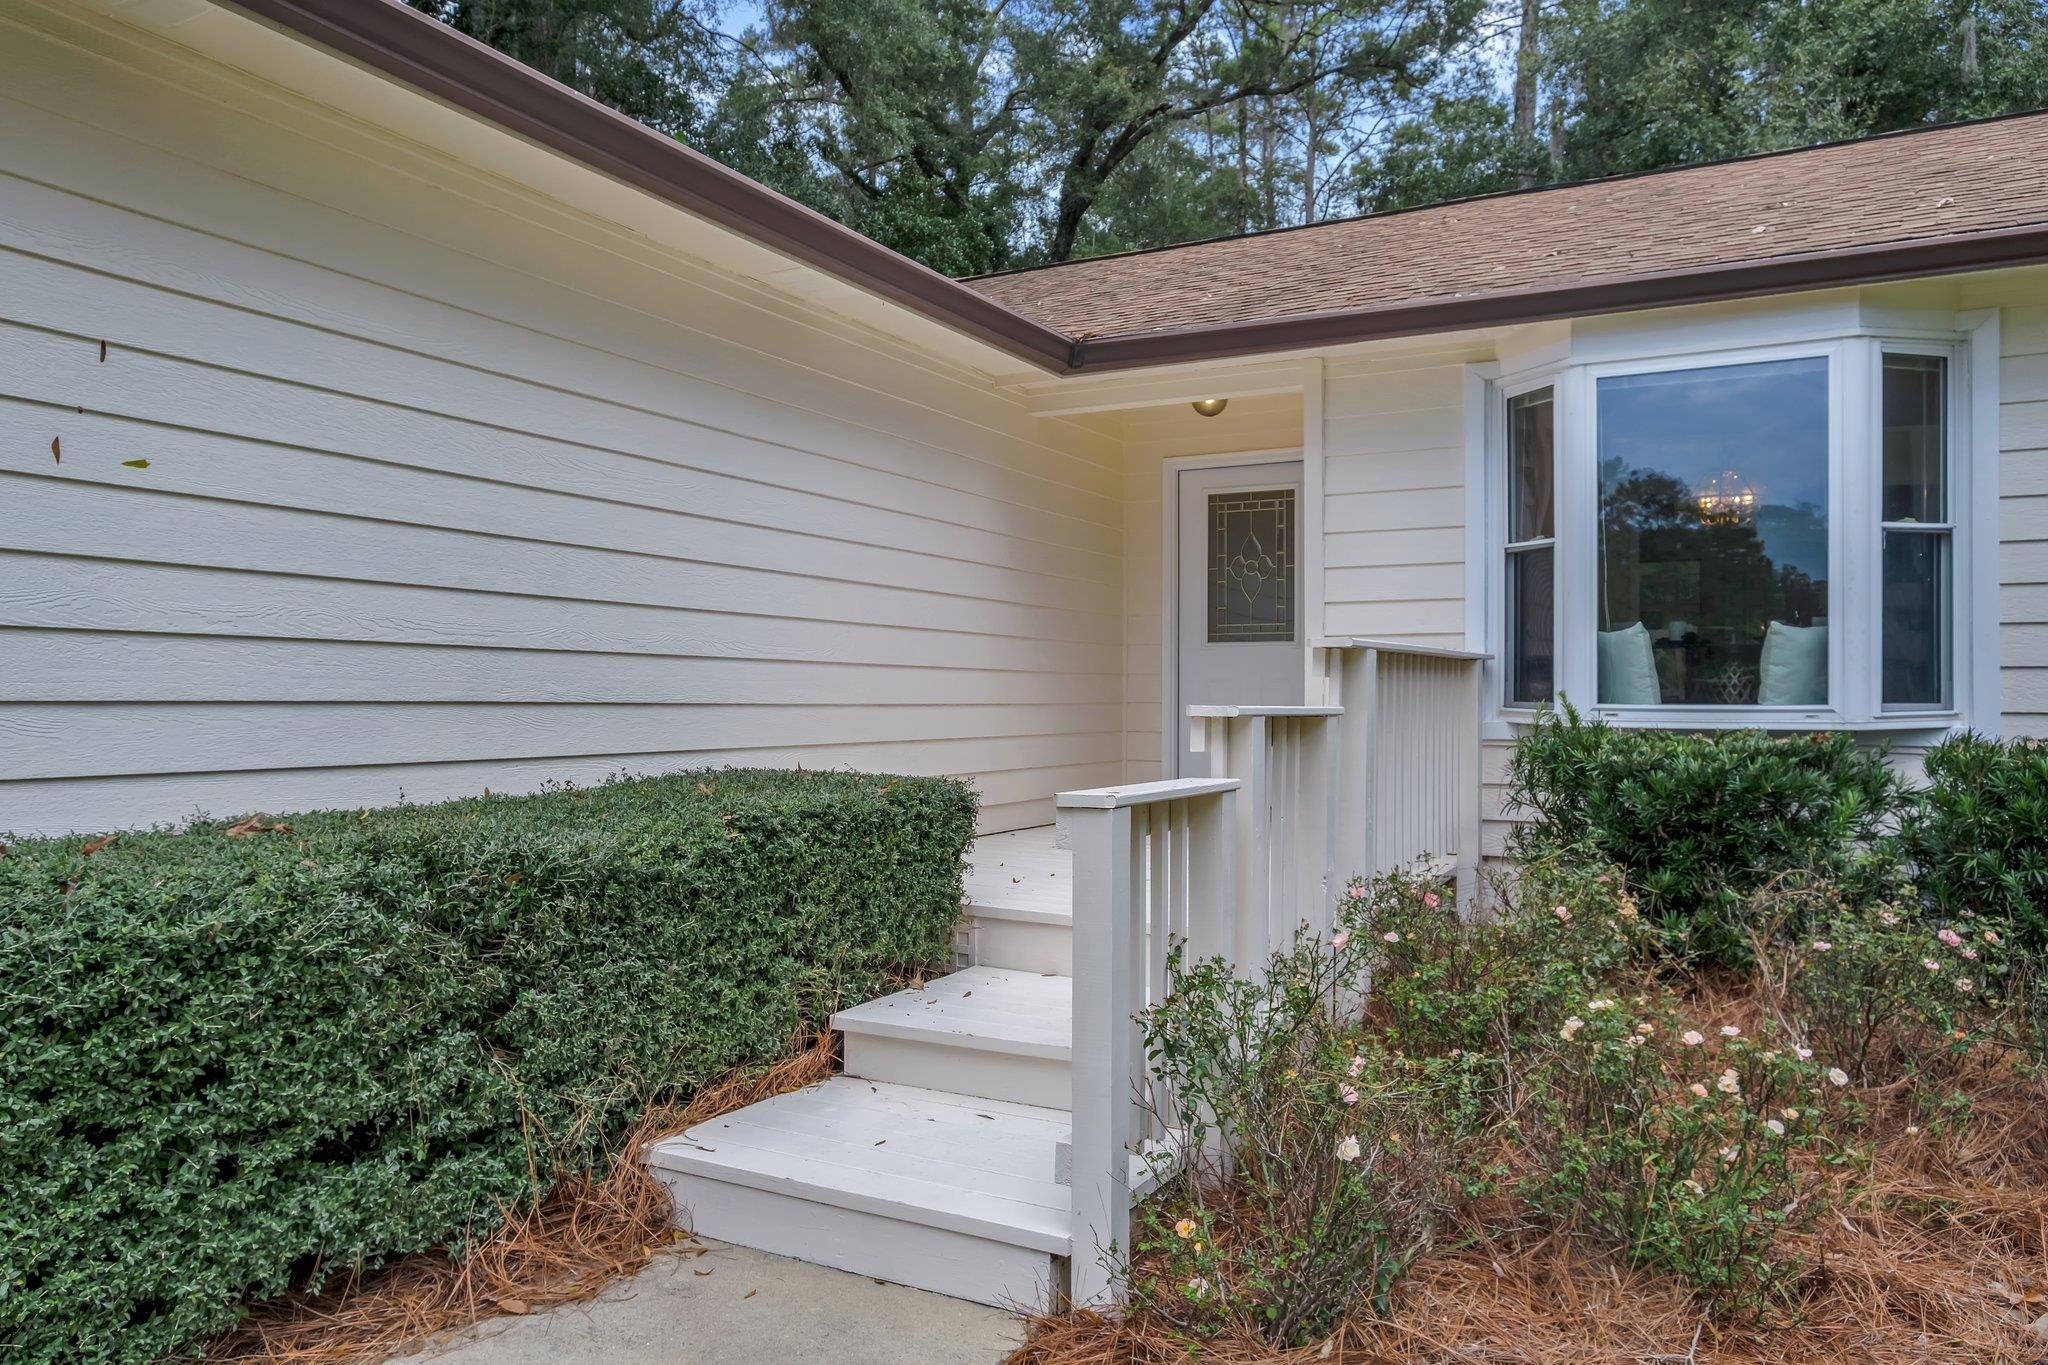 2656 Chumleigh Circle,TALLAHASSEE,Florida 32309,3 Bedrooms Bedrooms,2 BathroomsBathrooms,Detached single family,2656 Chumleigh Circle,366388